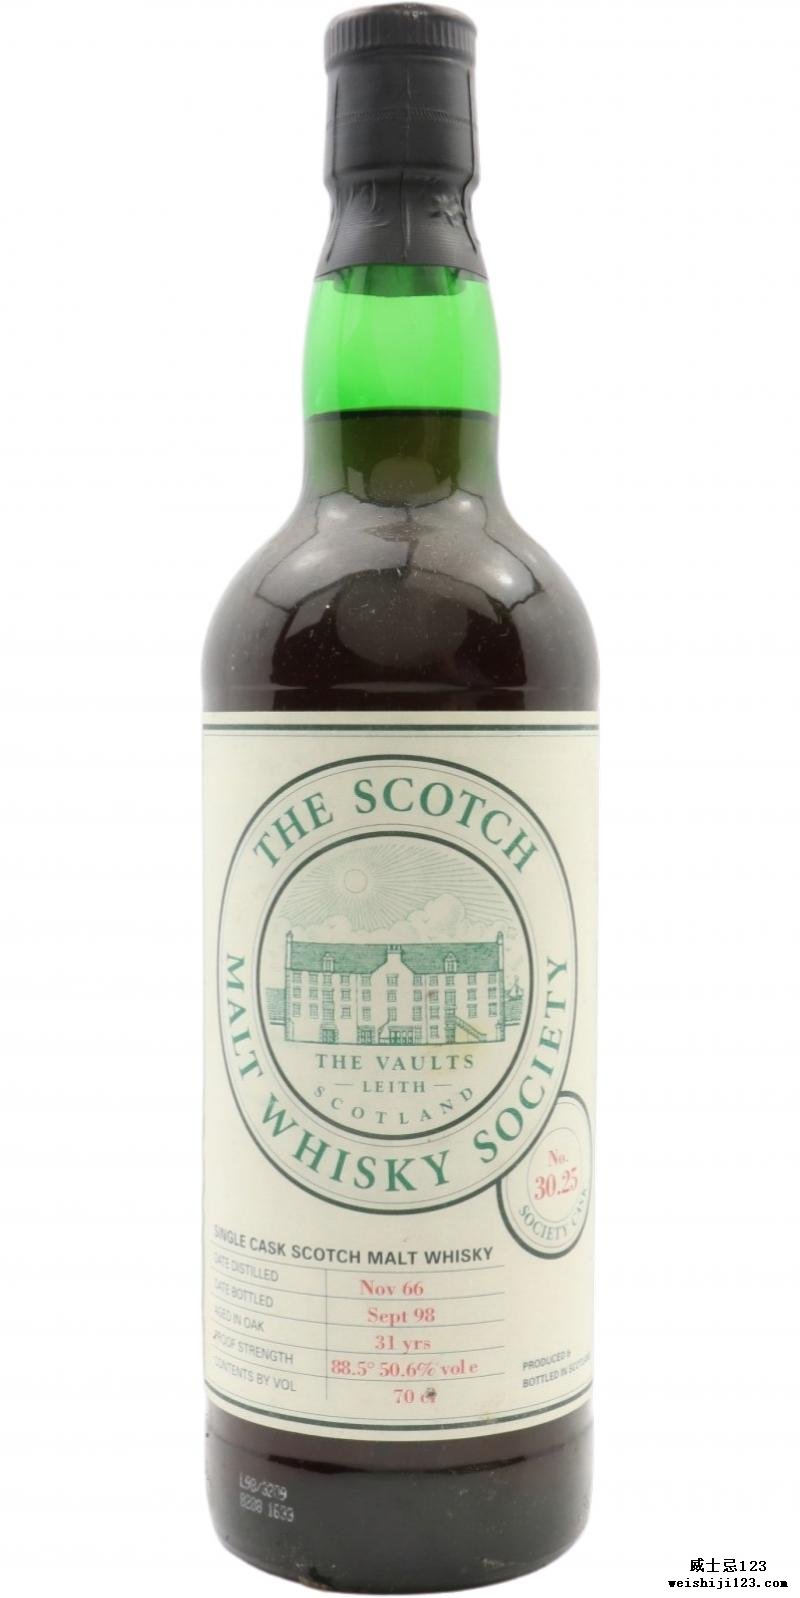 Glenrothes 1966 SMWS 30.25